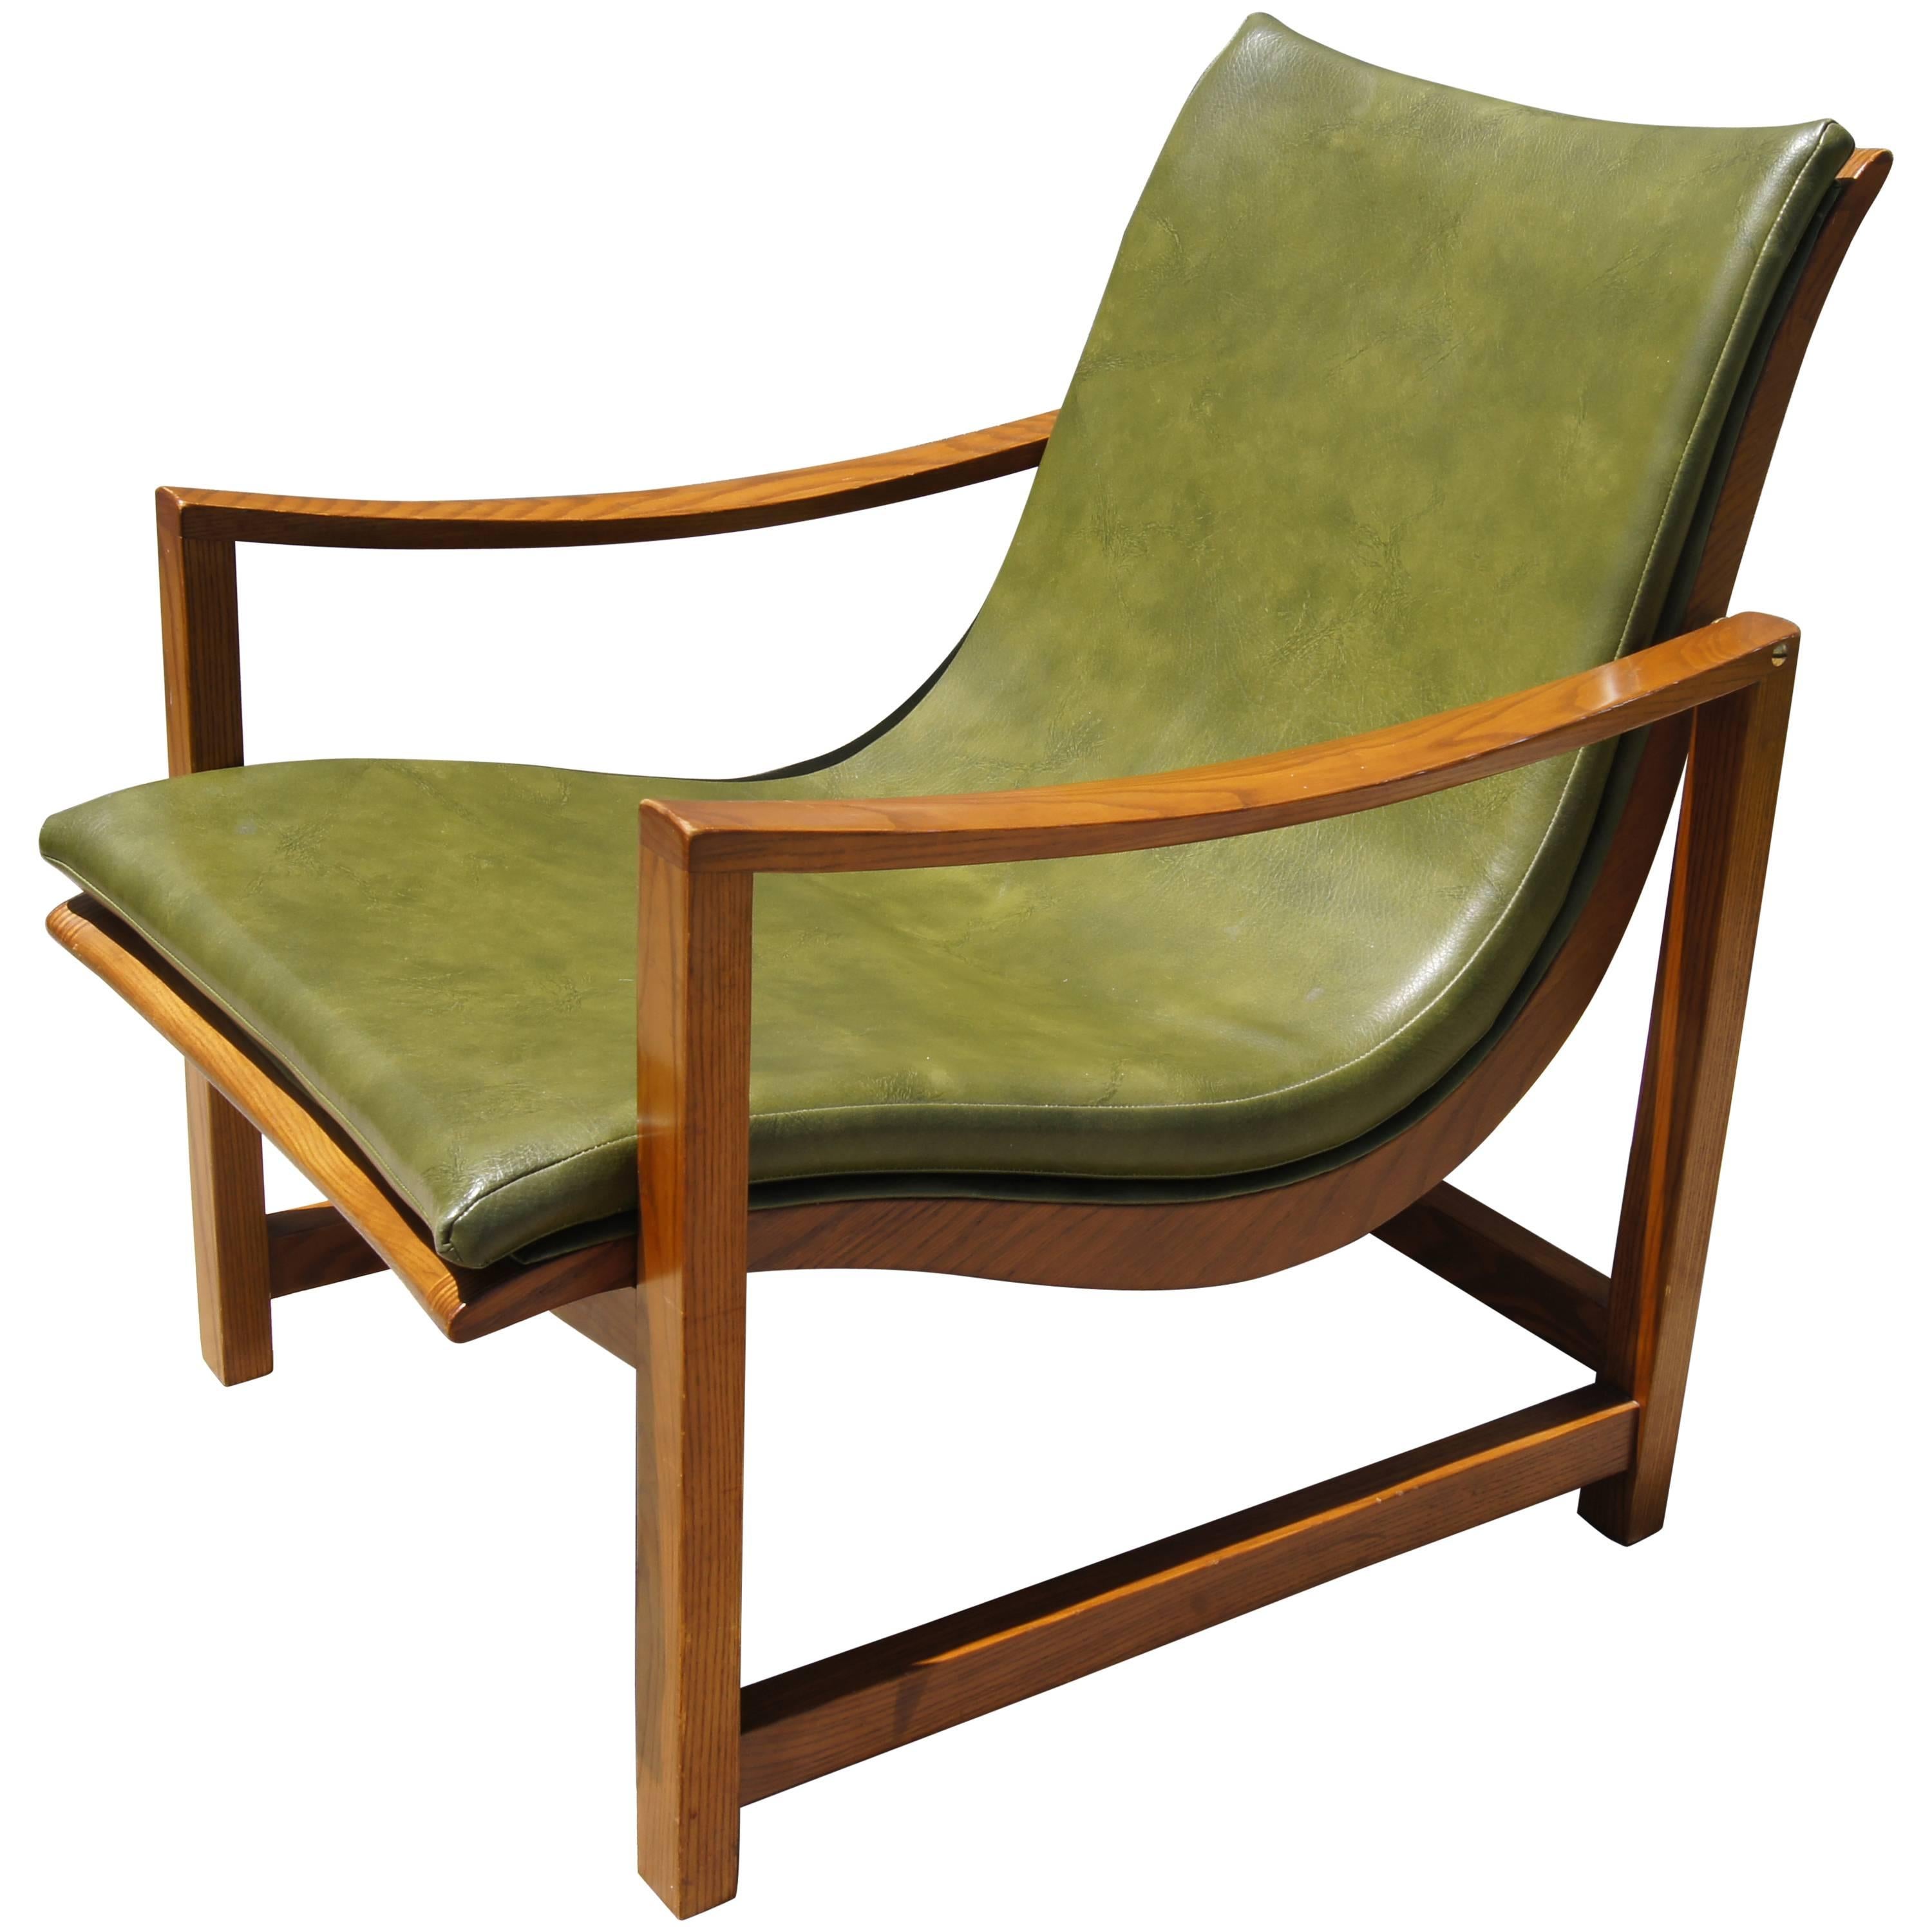 Rare Leather-Embossed Lounge Chair by Edward Wormley for Dunbar